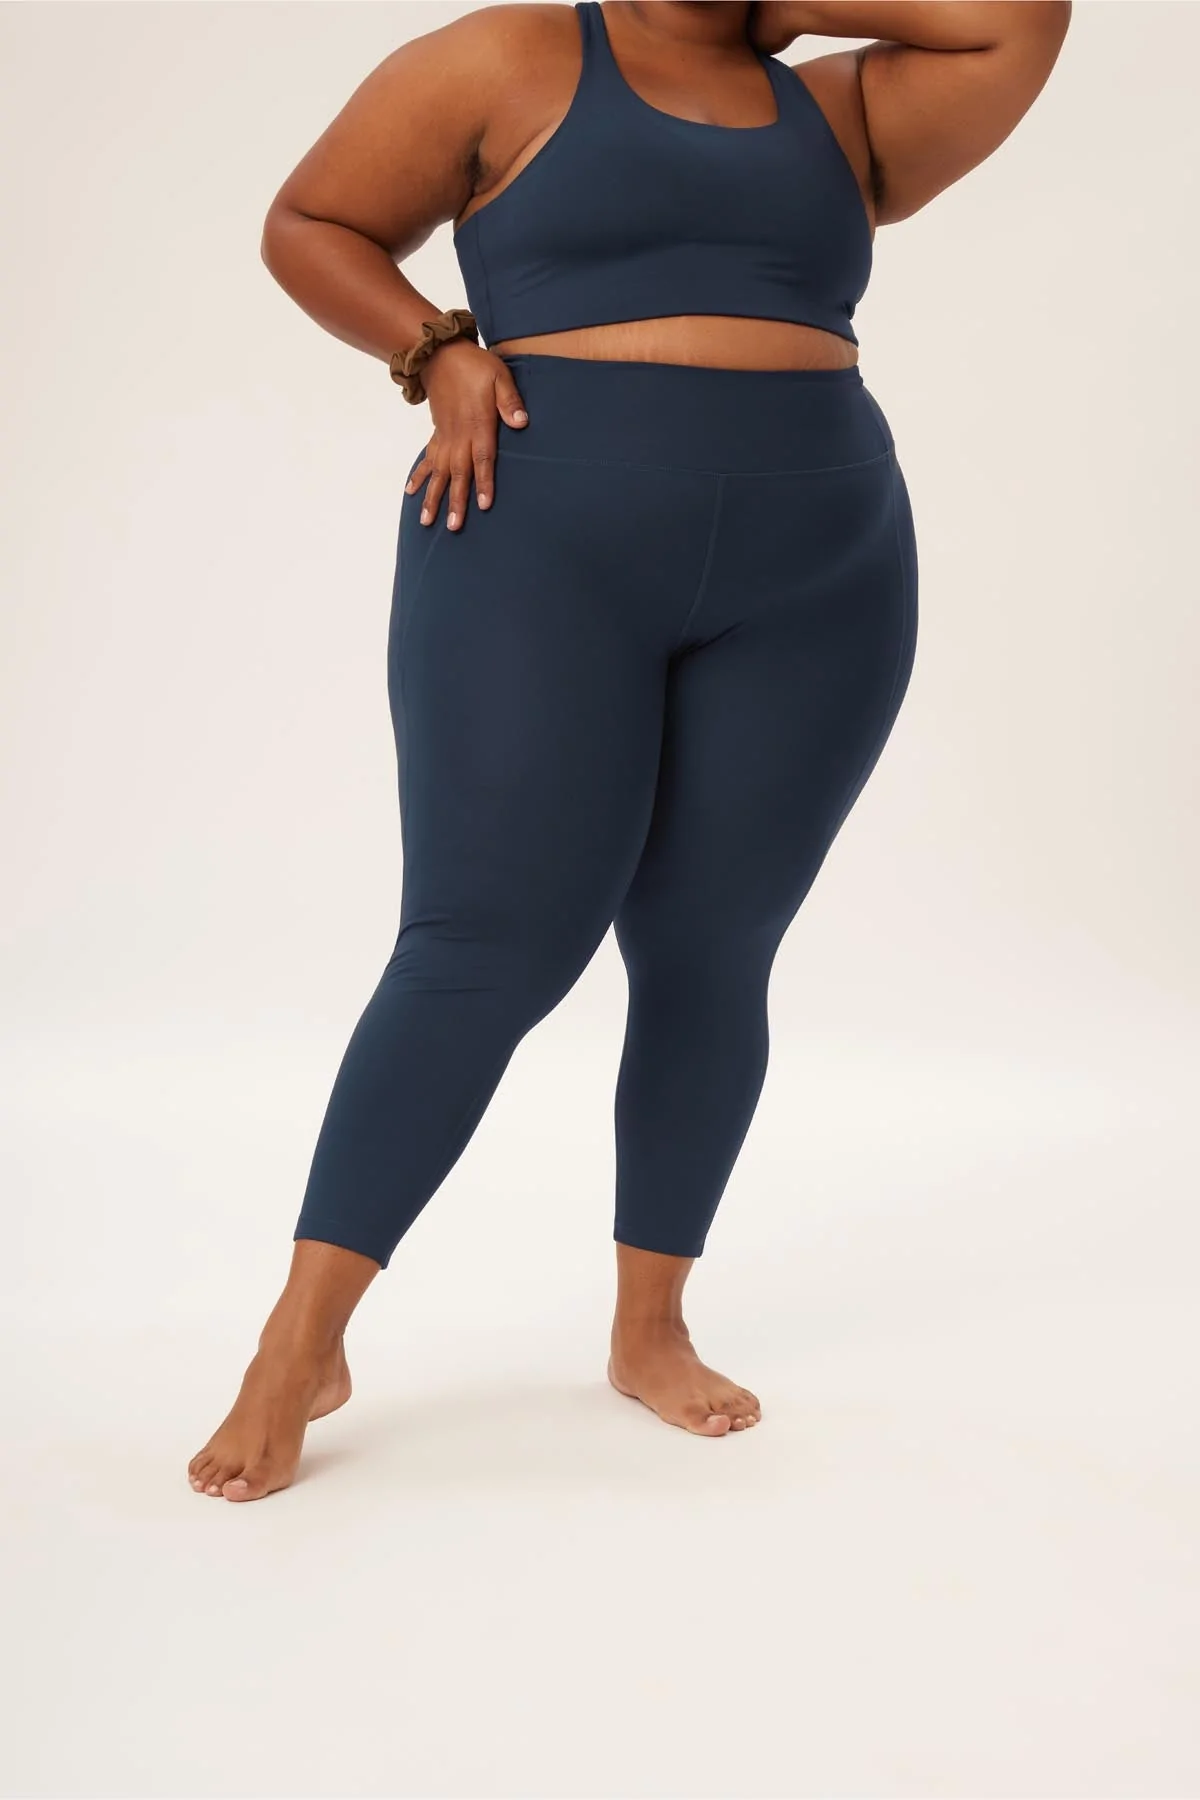 Love and Fit: LOVE & FIT Best selling leggings - Which one is for